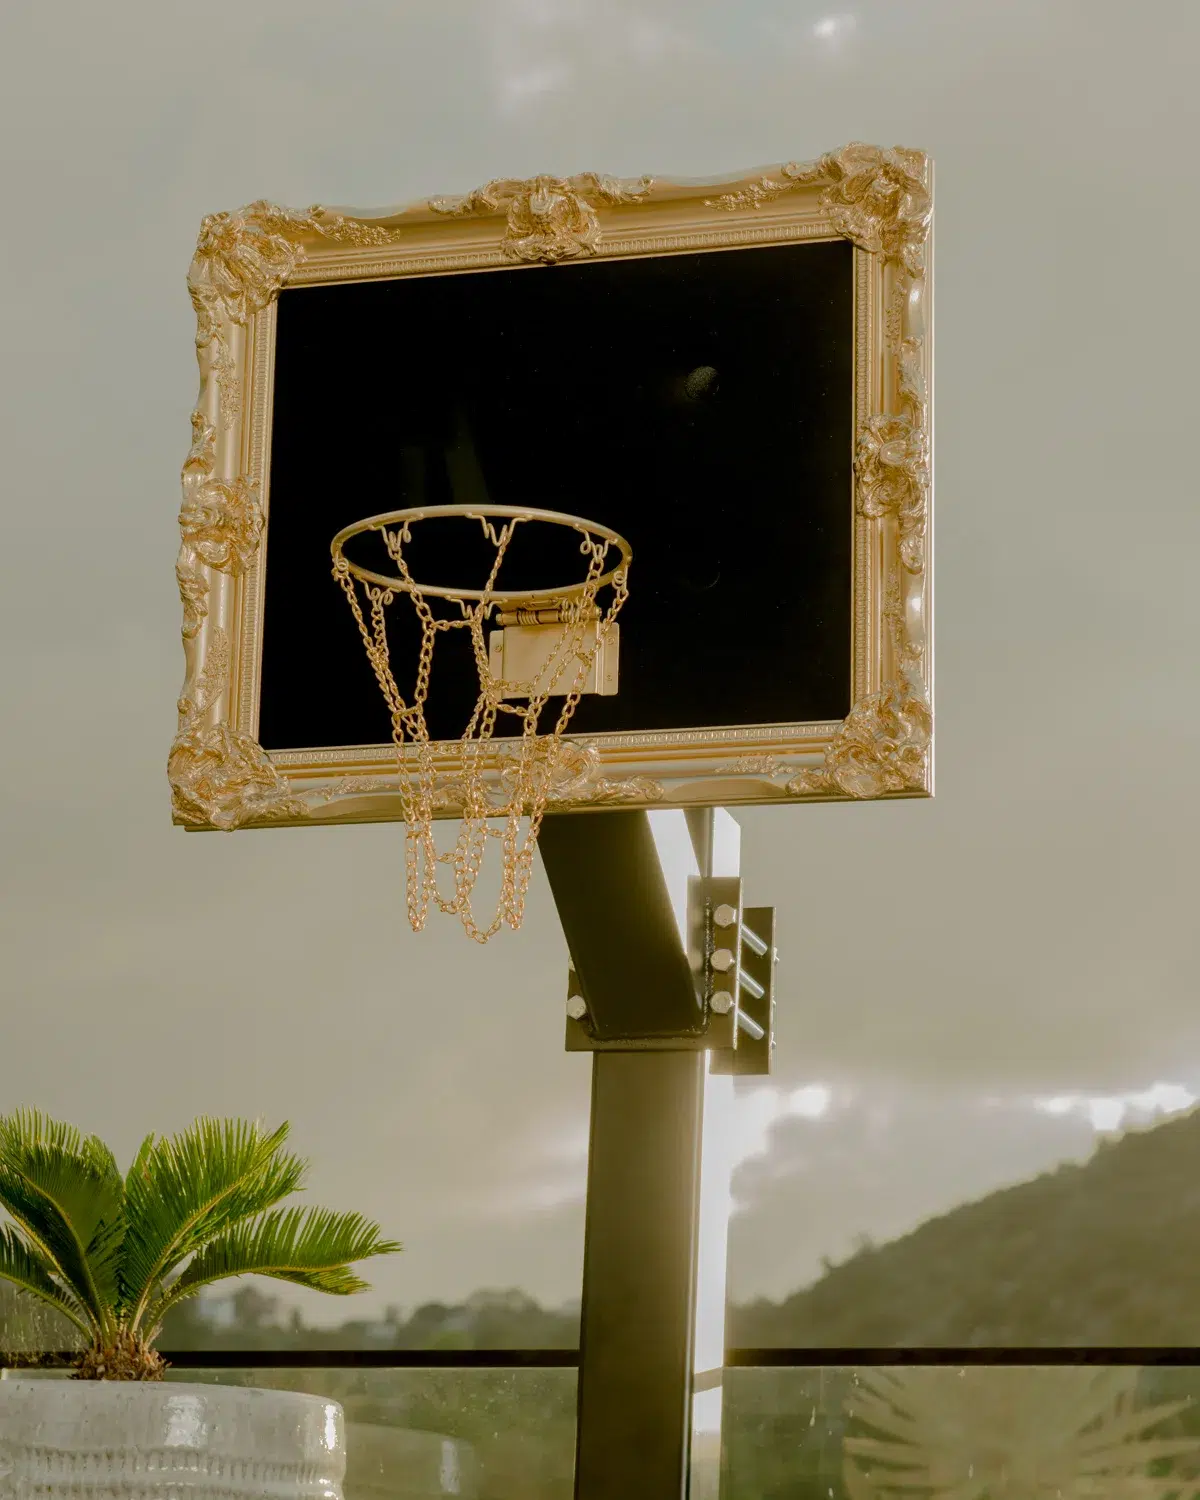 A rooftop installation featuring a black velvet hoop in a frame.